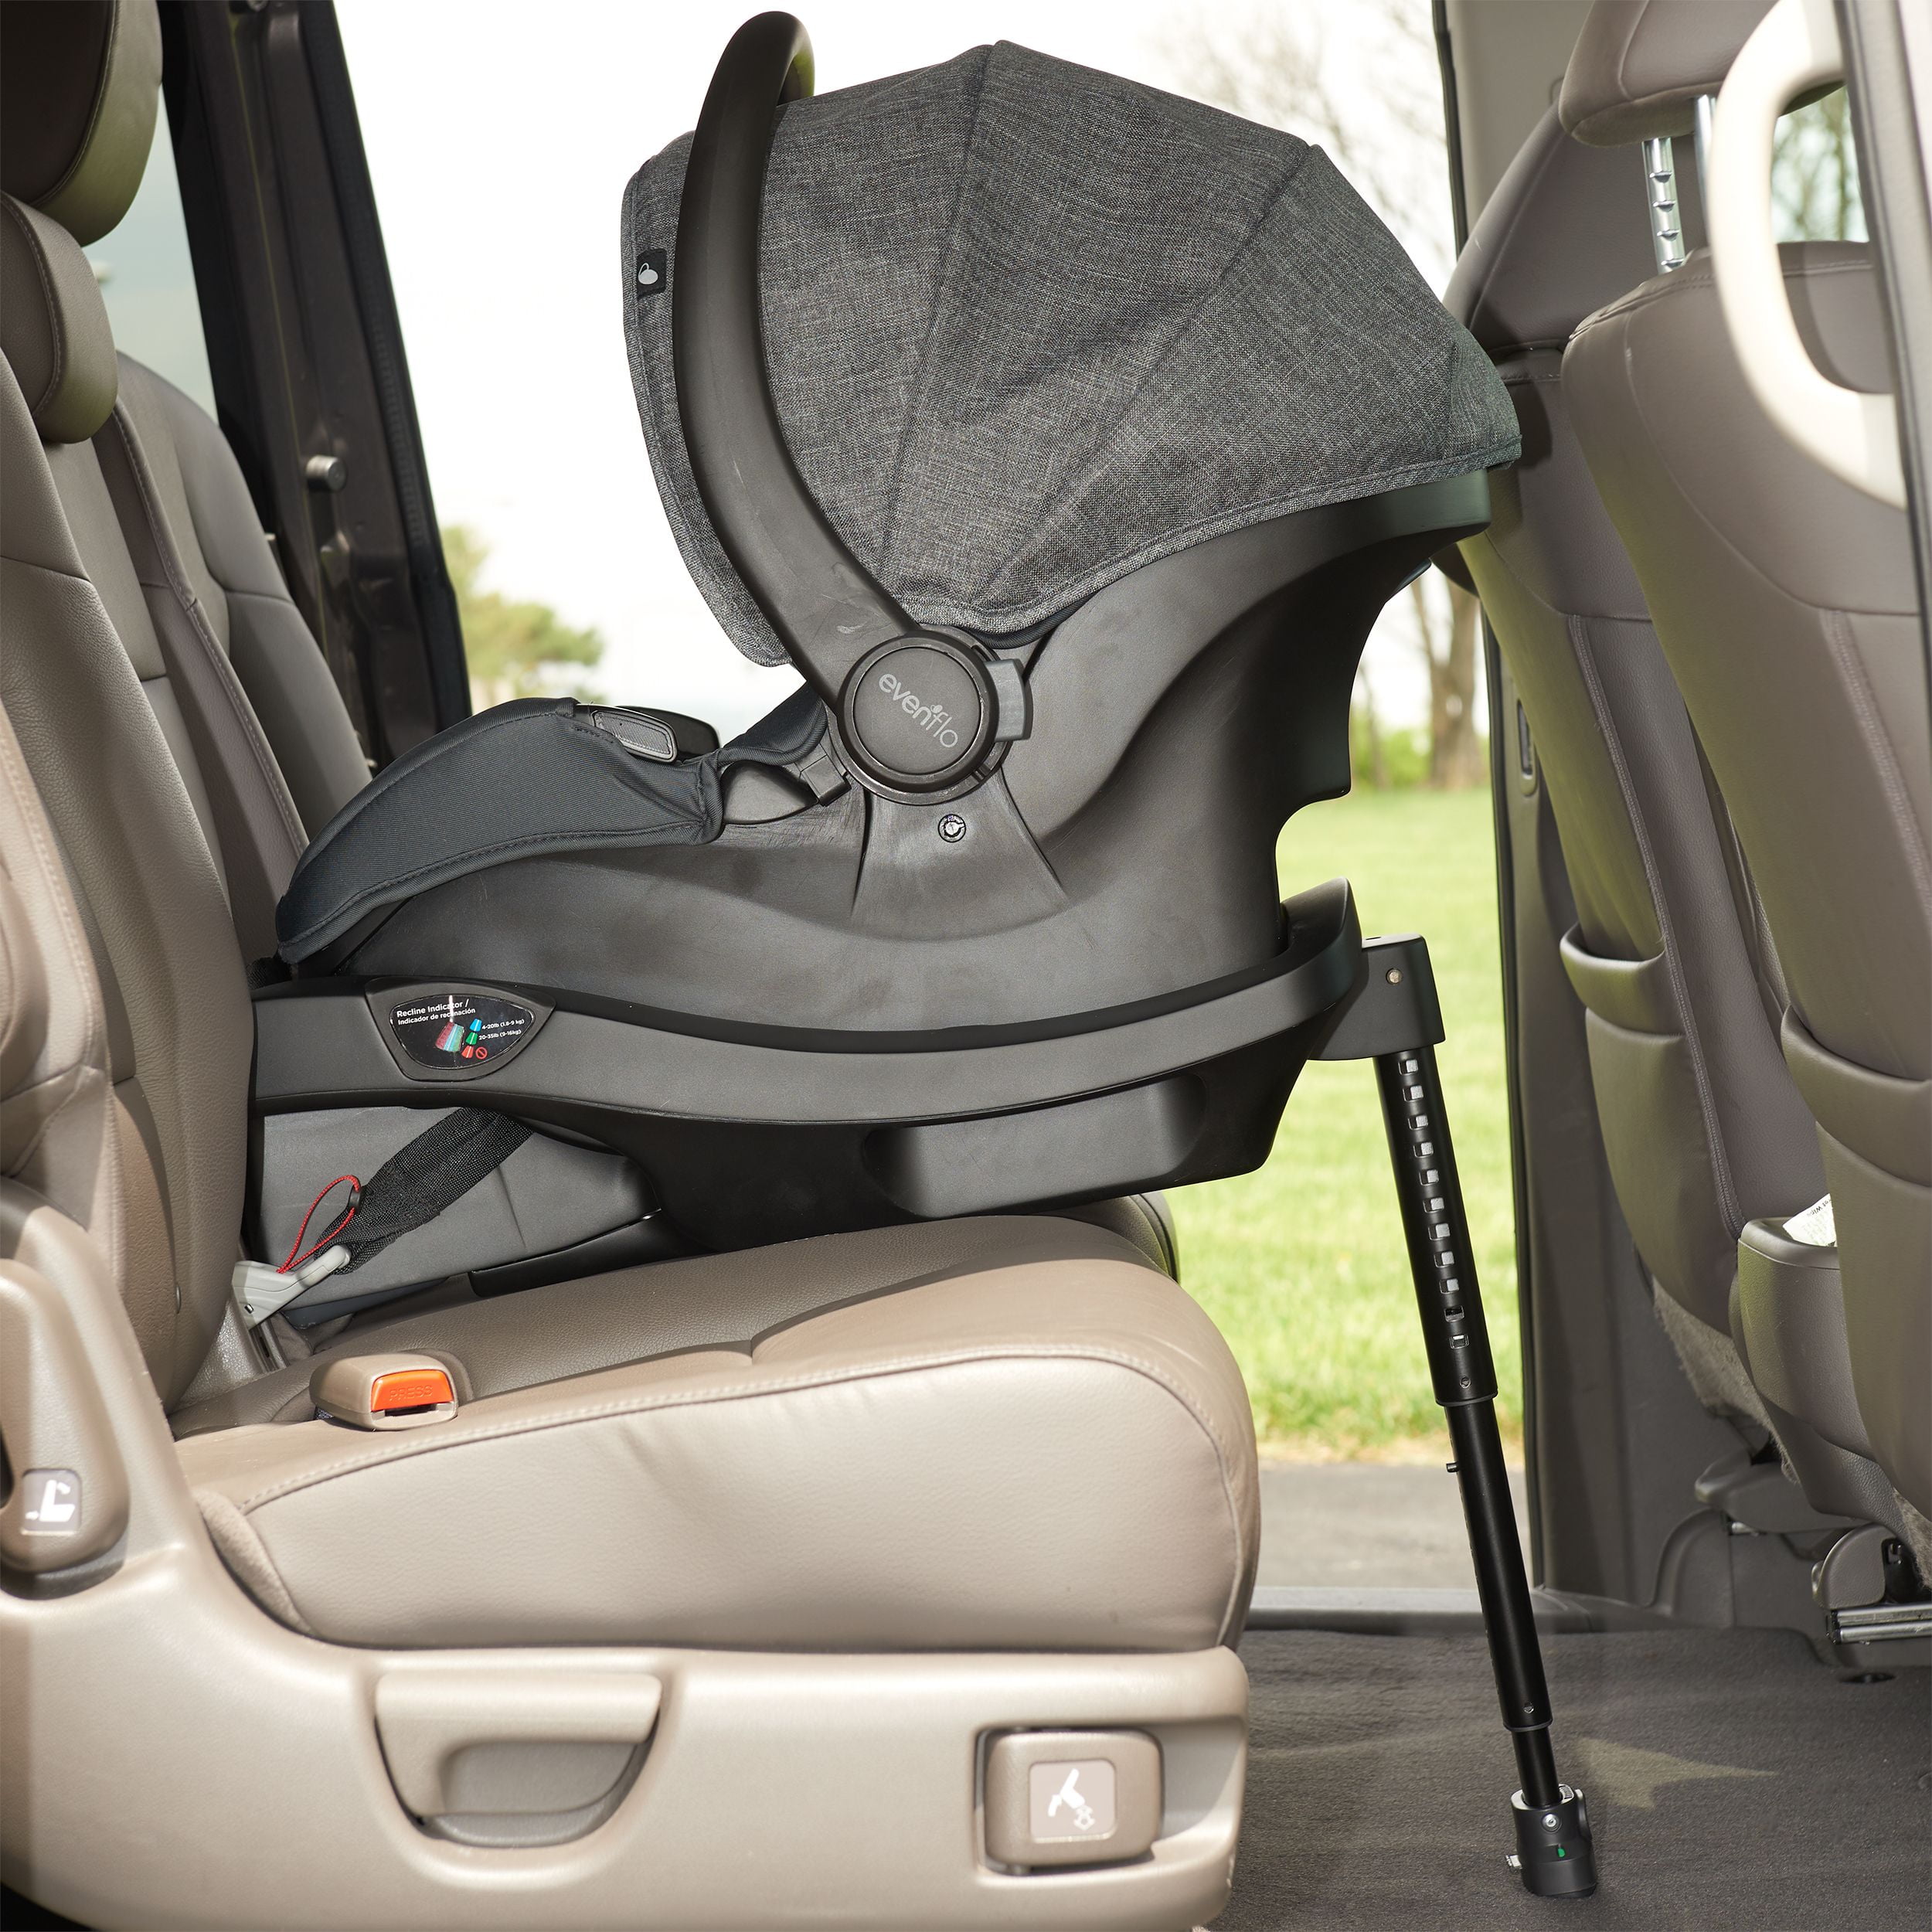 How To Install Evenflo Car Seat Base